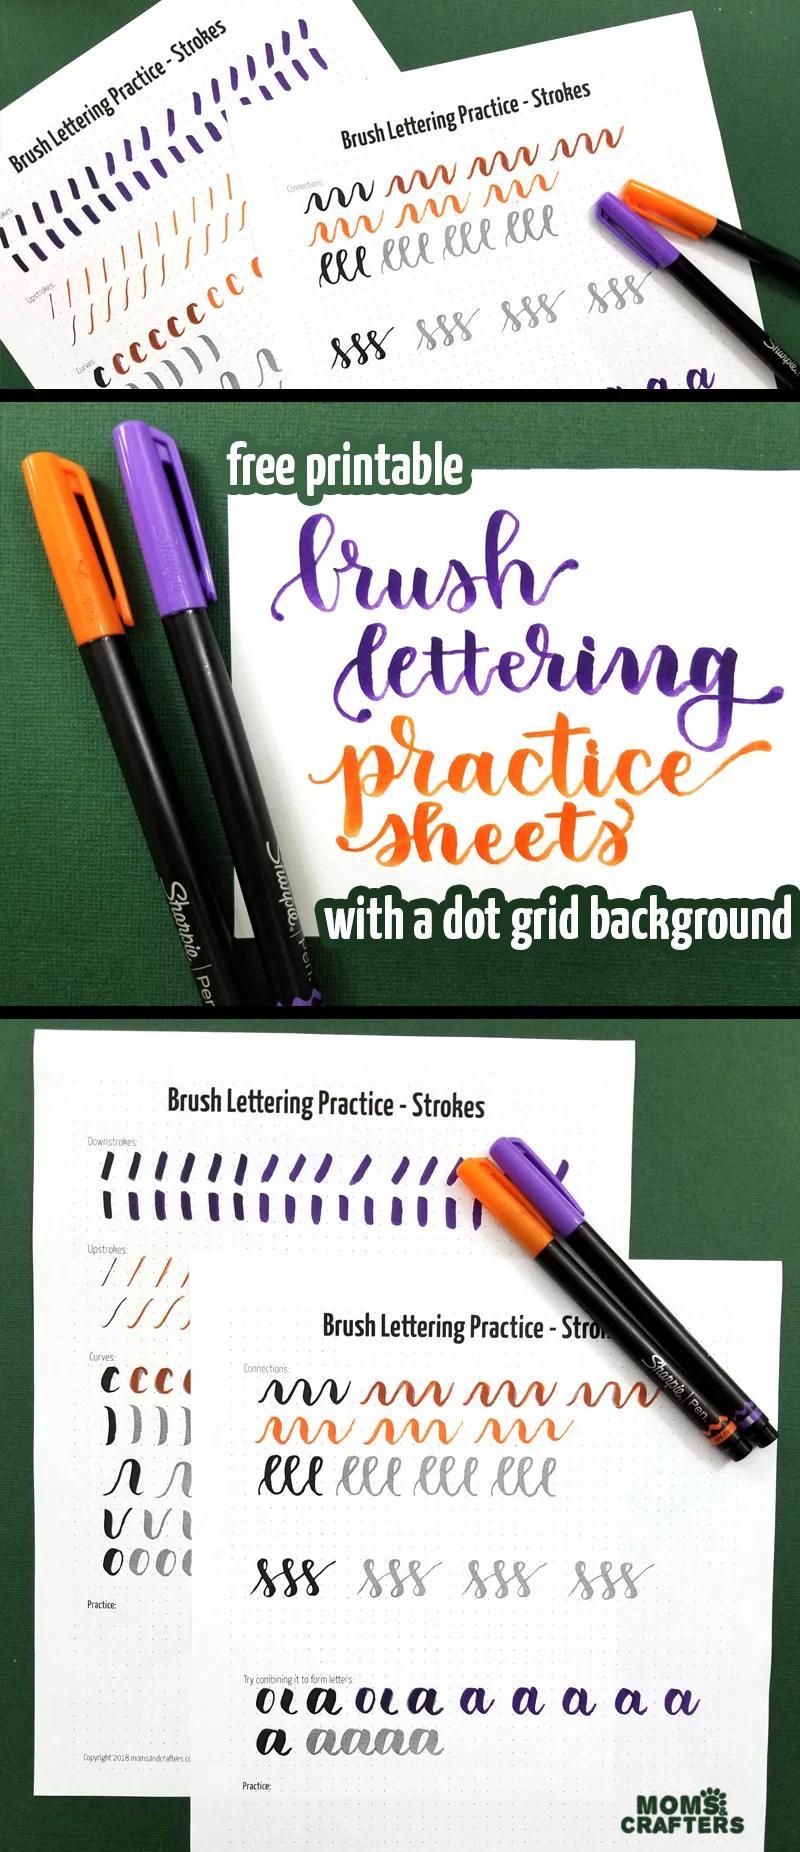 Click to download these free printable brush lettering practice sheets to learn how to do hand lettering with the basic strokes you need! #brushlettering #calligraphy #handlettering